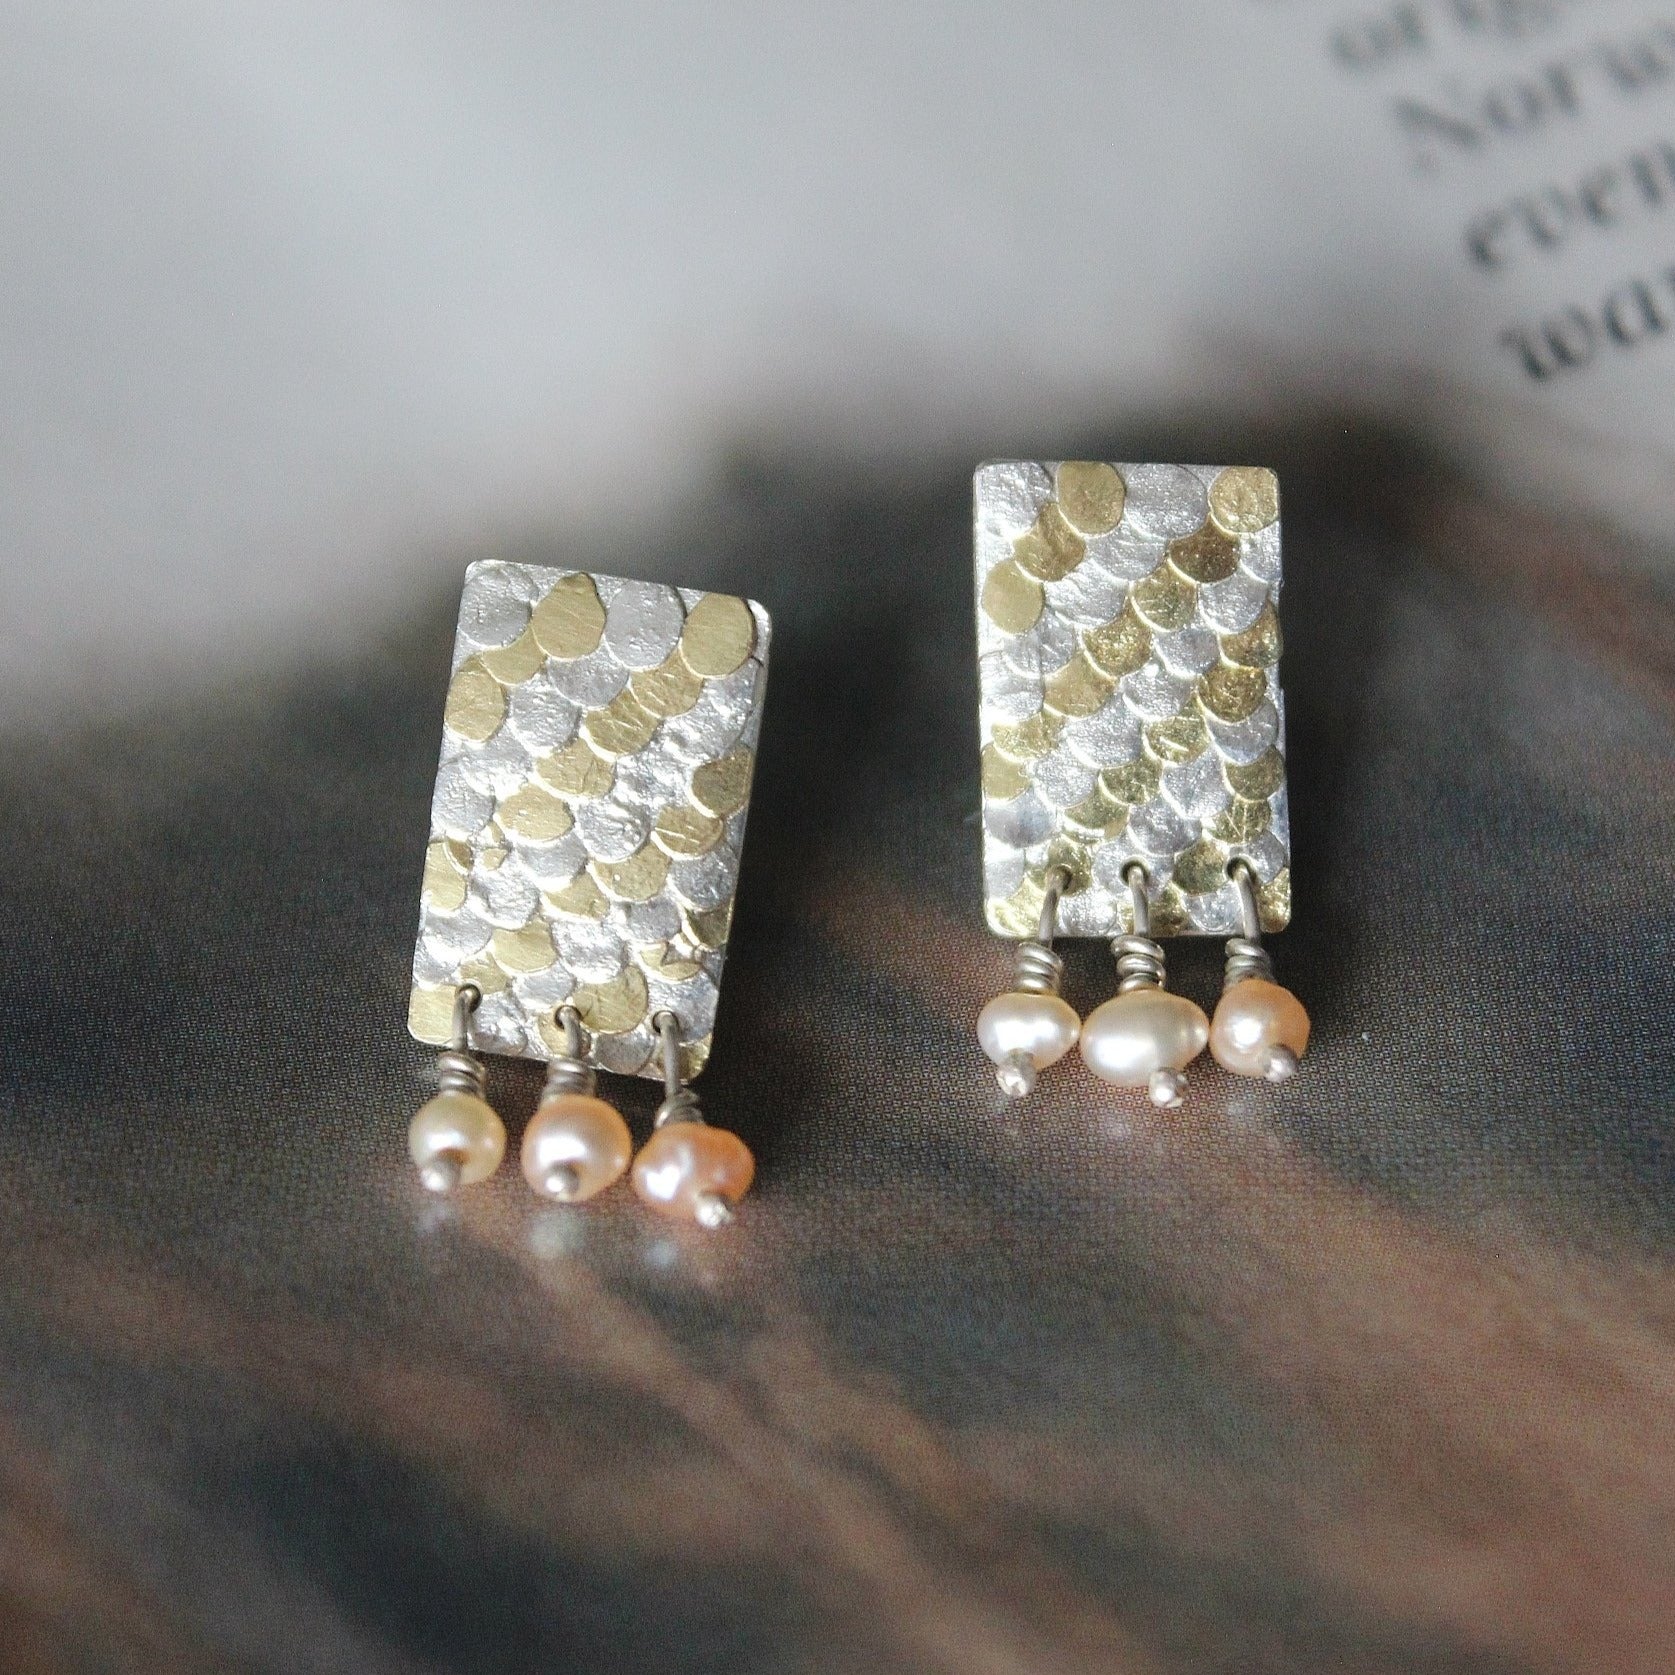 The Siren studs have been mindfully designed by Bournemouth based, Josie Mitchell jewellery, to be lightweight with luxurious, delicate details. Hand forged silver and 18ct gold scales are layered up to create a wonderful mermaid texture along with delicate pink fresh water pearls for a timeless and special pair of earrings.